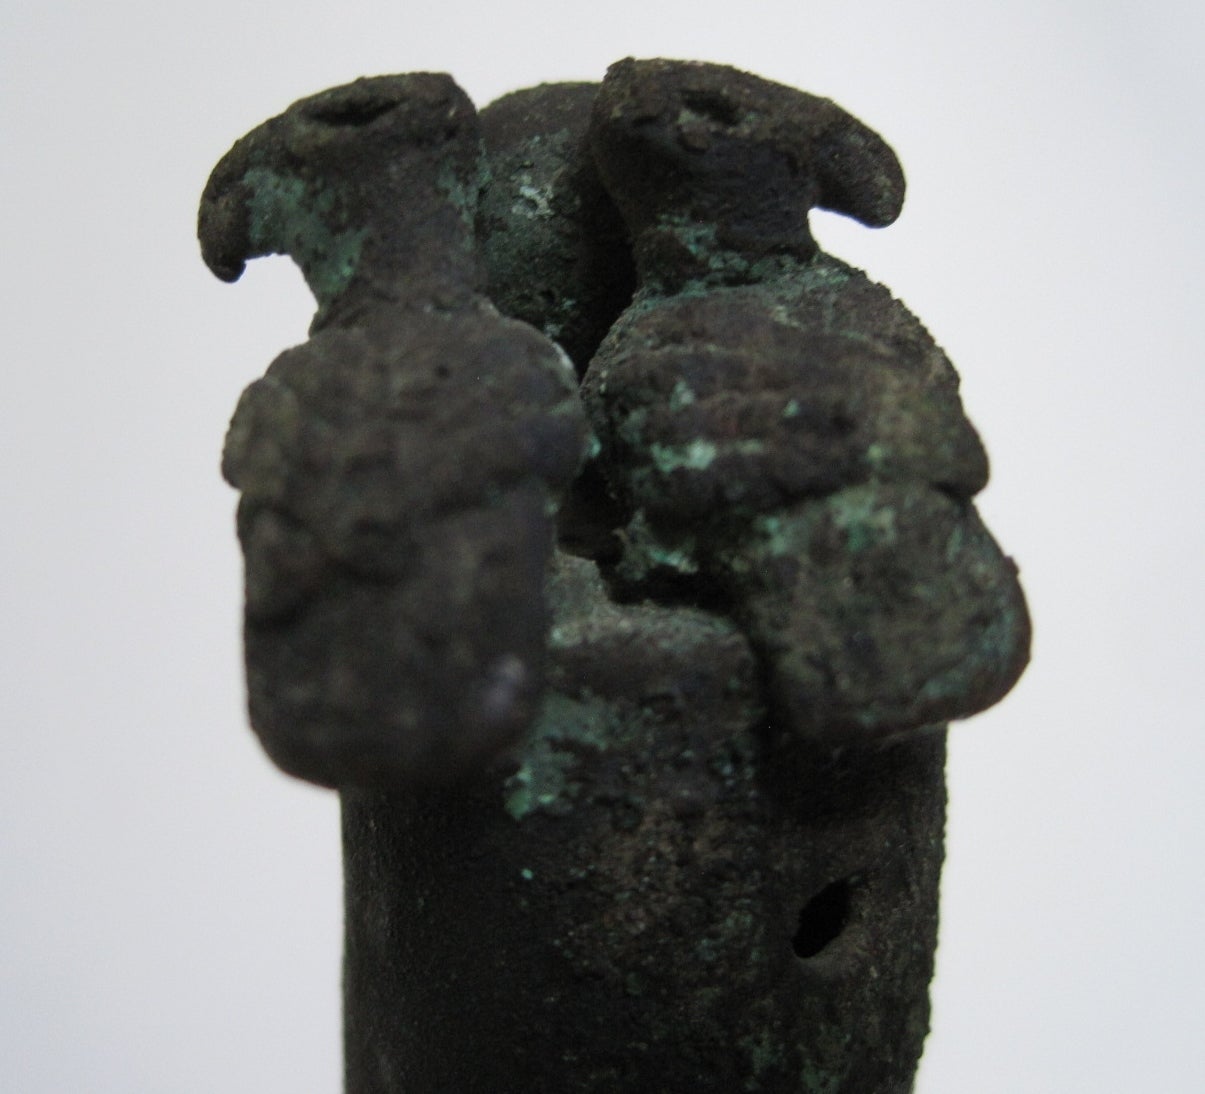 Pre-Columbian bronze tumi sacrificial knife, circa 0-500 A.D.

Free shipping within the United States and Canada.

A green oxidized bronze sacrificial axe with a thin blade, a cylindrical shaft with a ringing bell (rattle) and three tiny